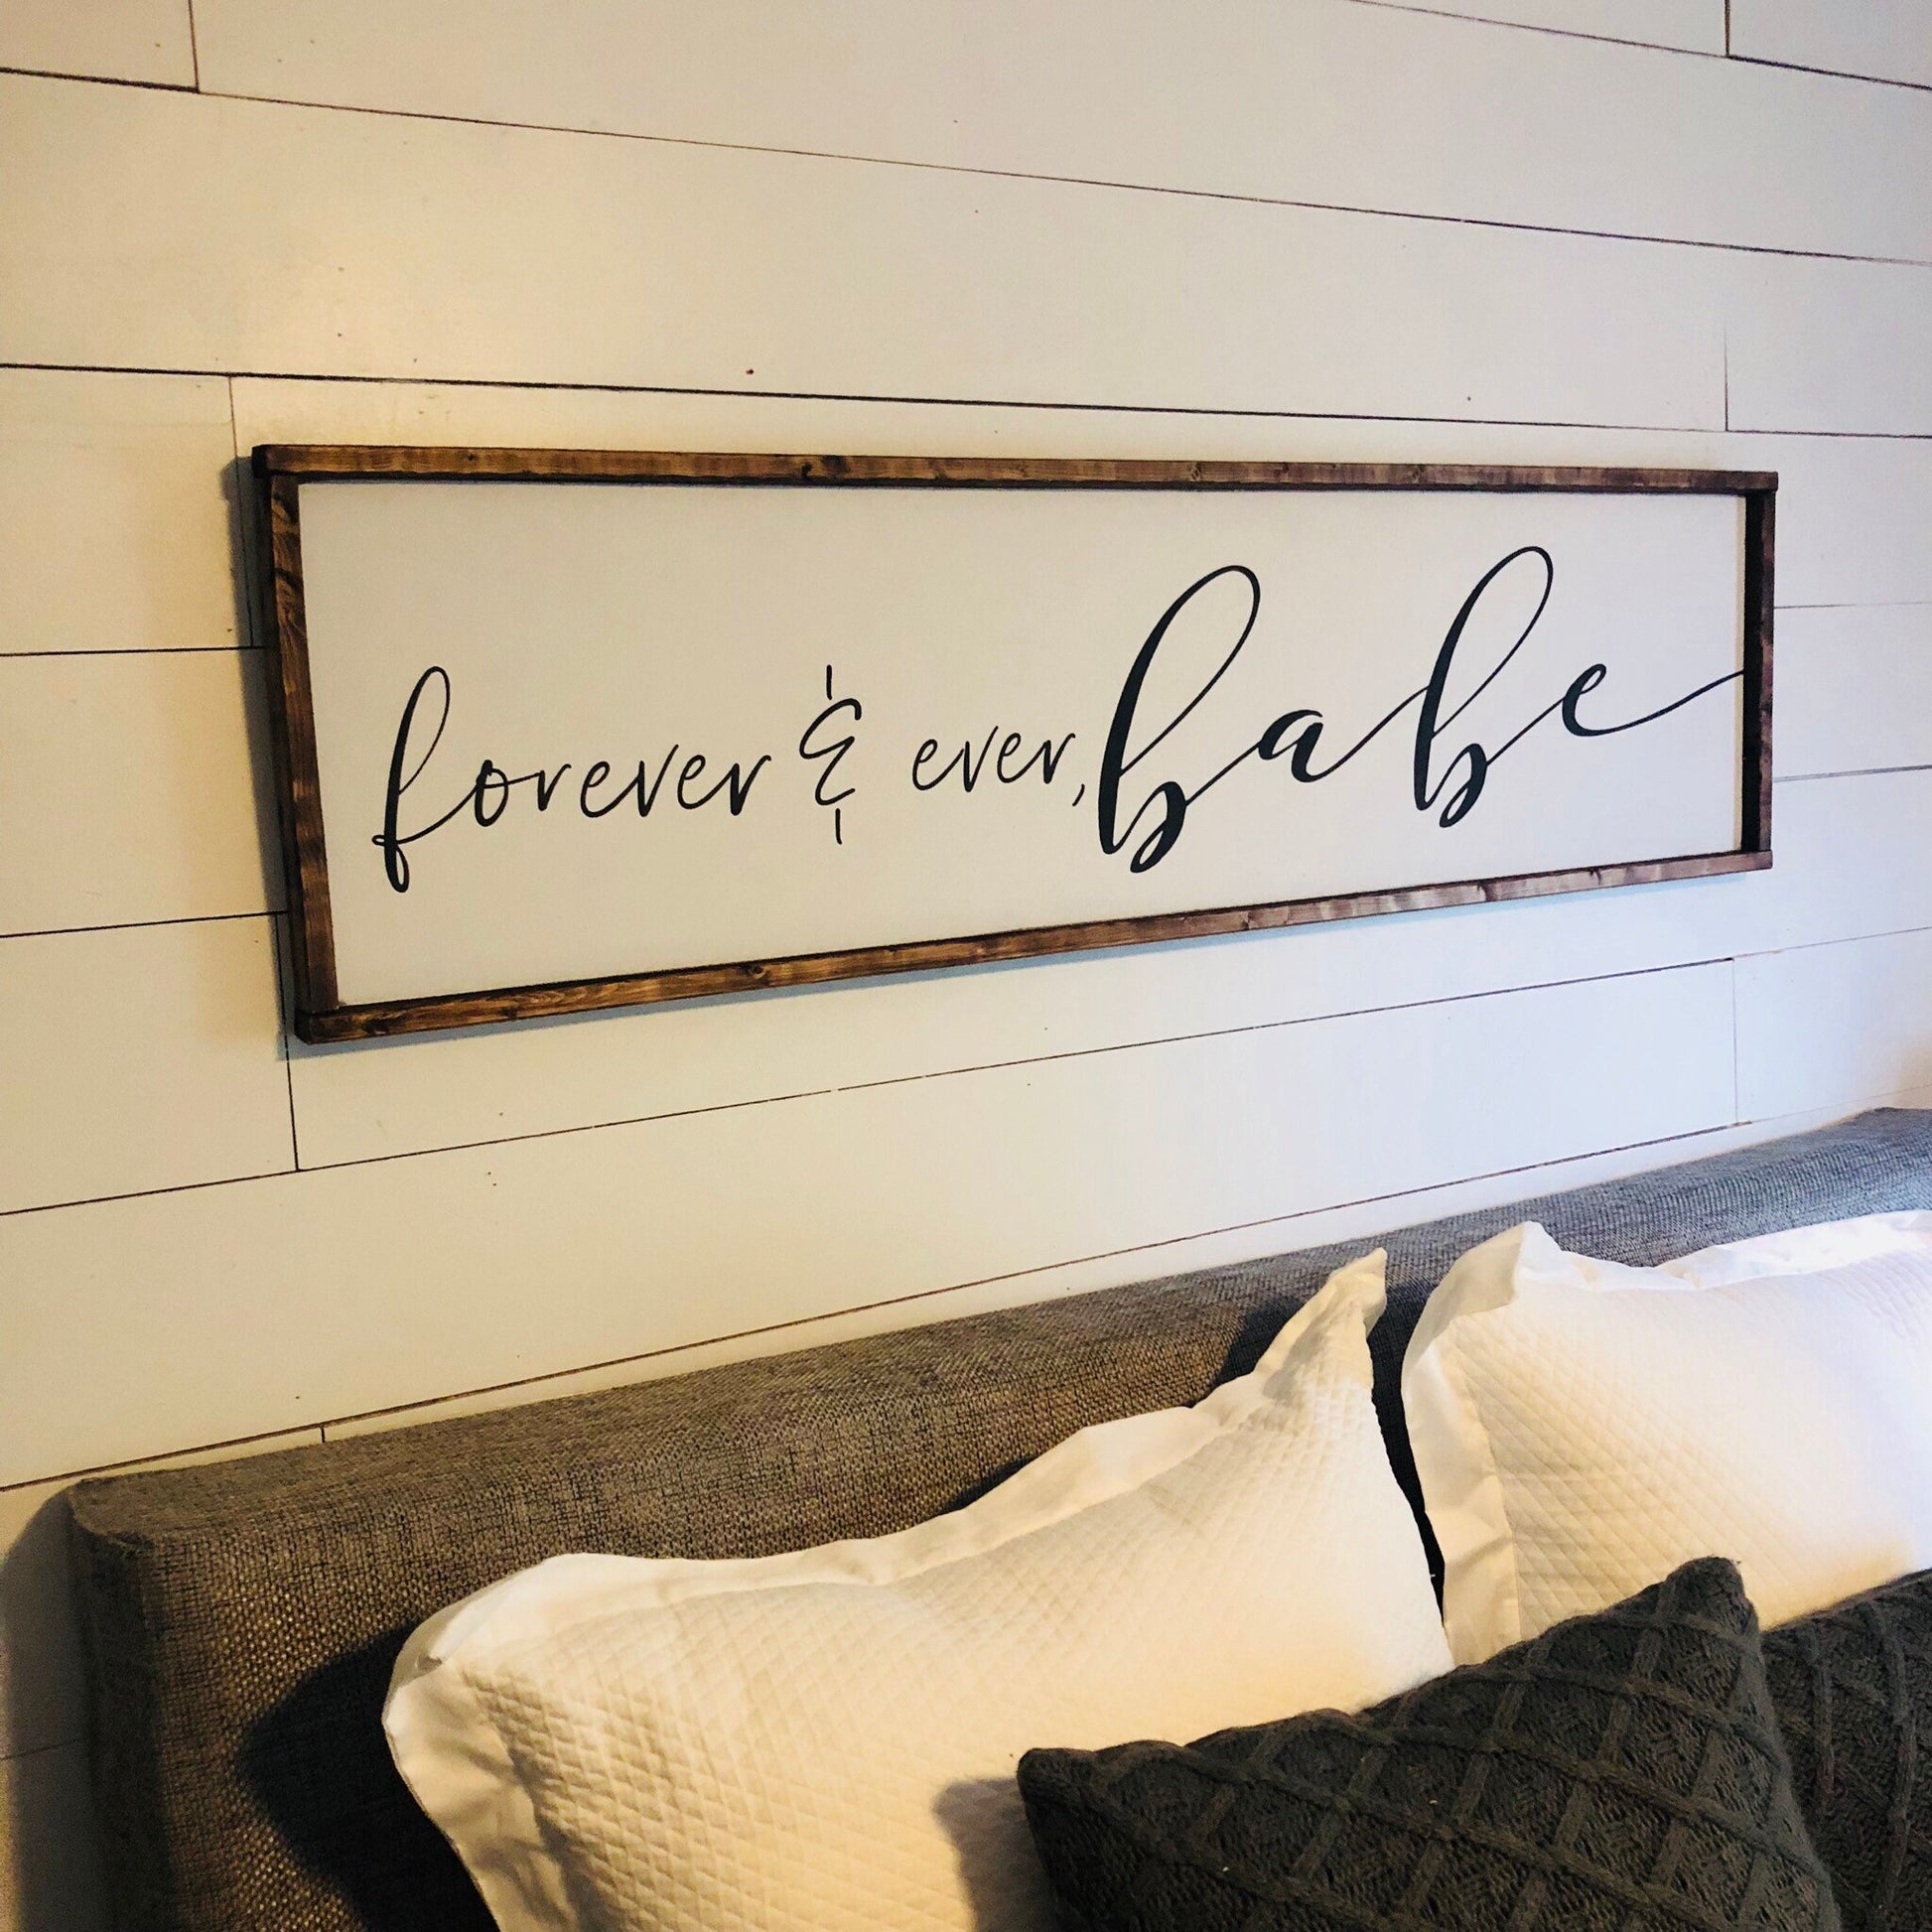 forever & ever, babe. - above over the bed sign - master bedroom wall art [FREE SHIPPING!]